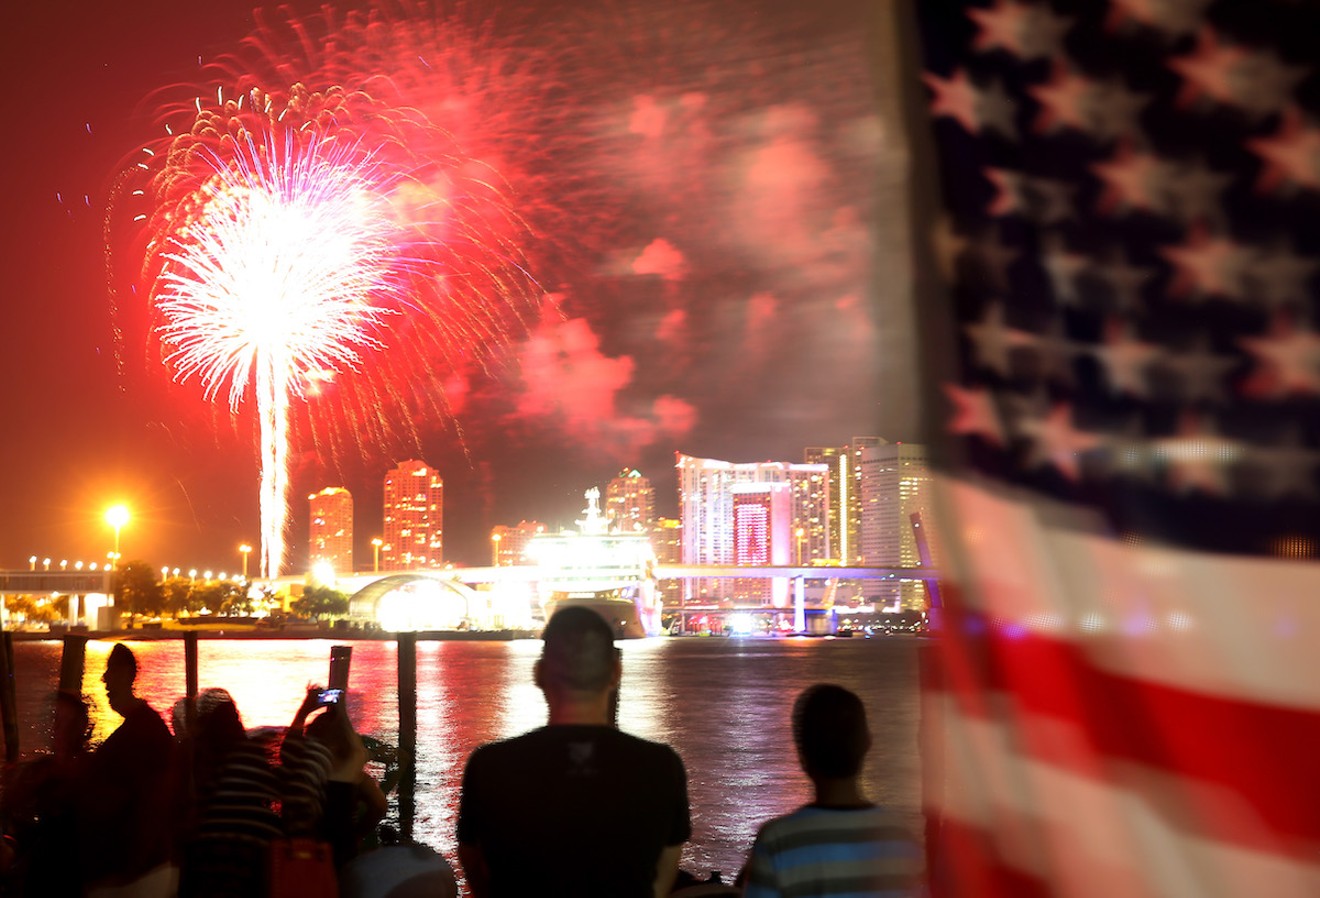 The Miami skyline lights up with fireworks on the Fourth of July.